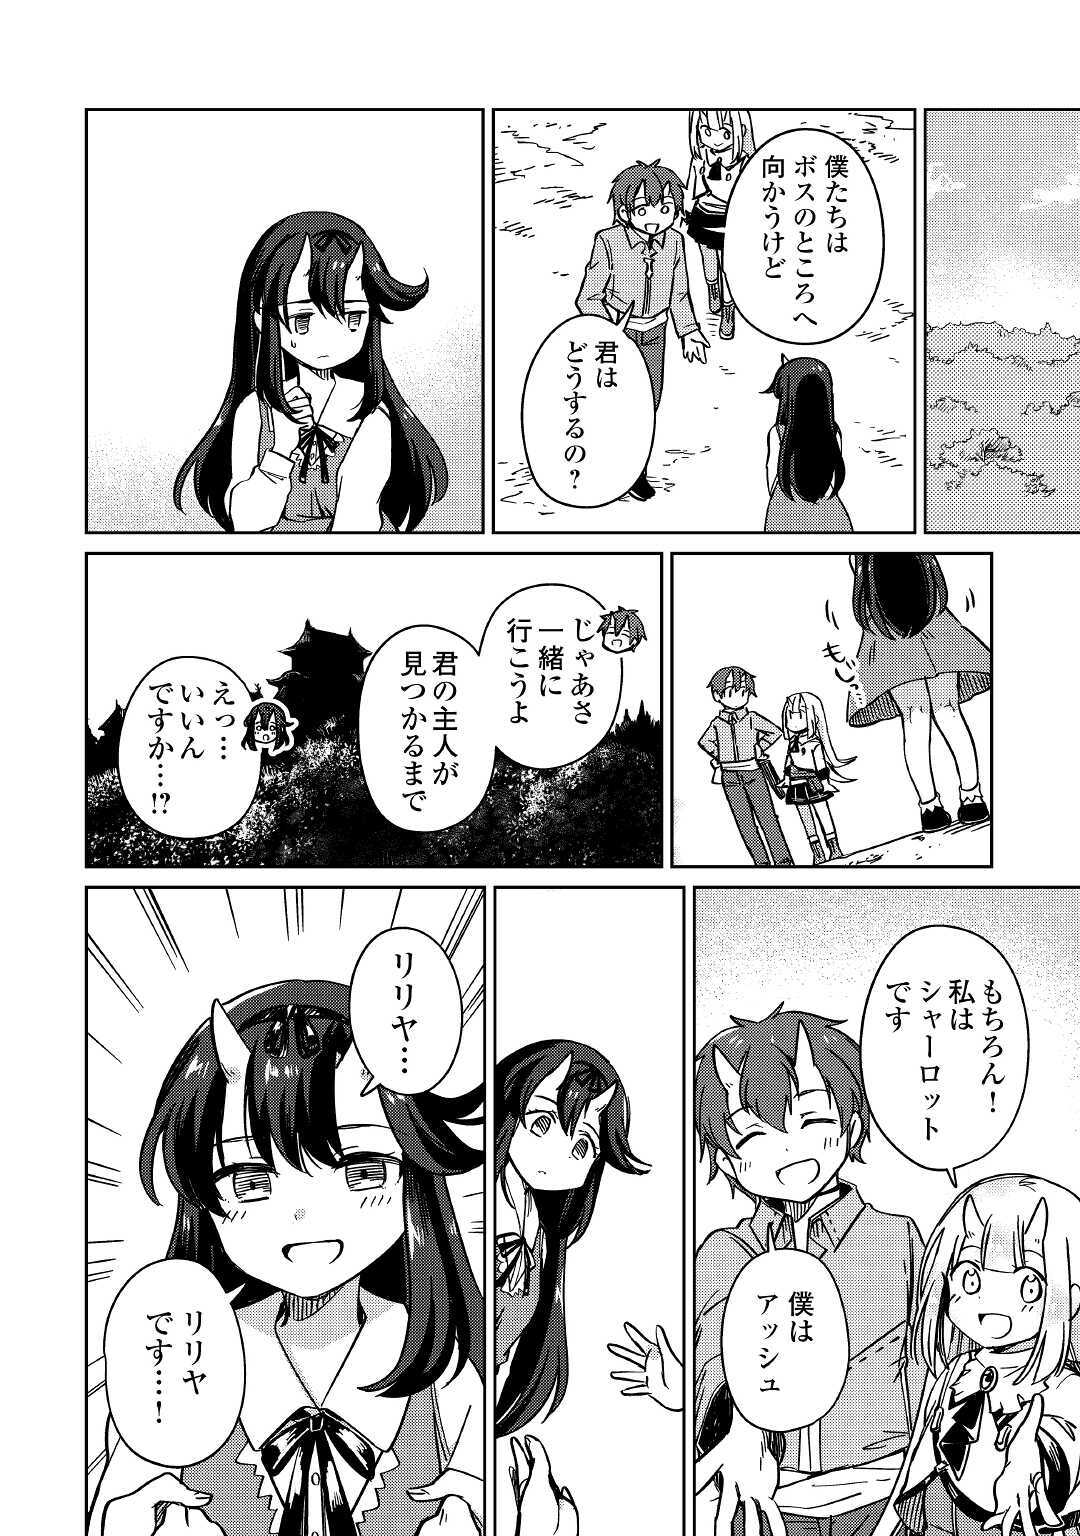 The Former Structural Researcher’s Story of Otherworldly Adventure 第29話 - Page 20